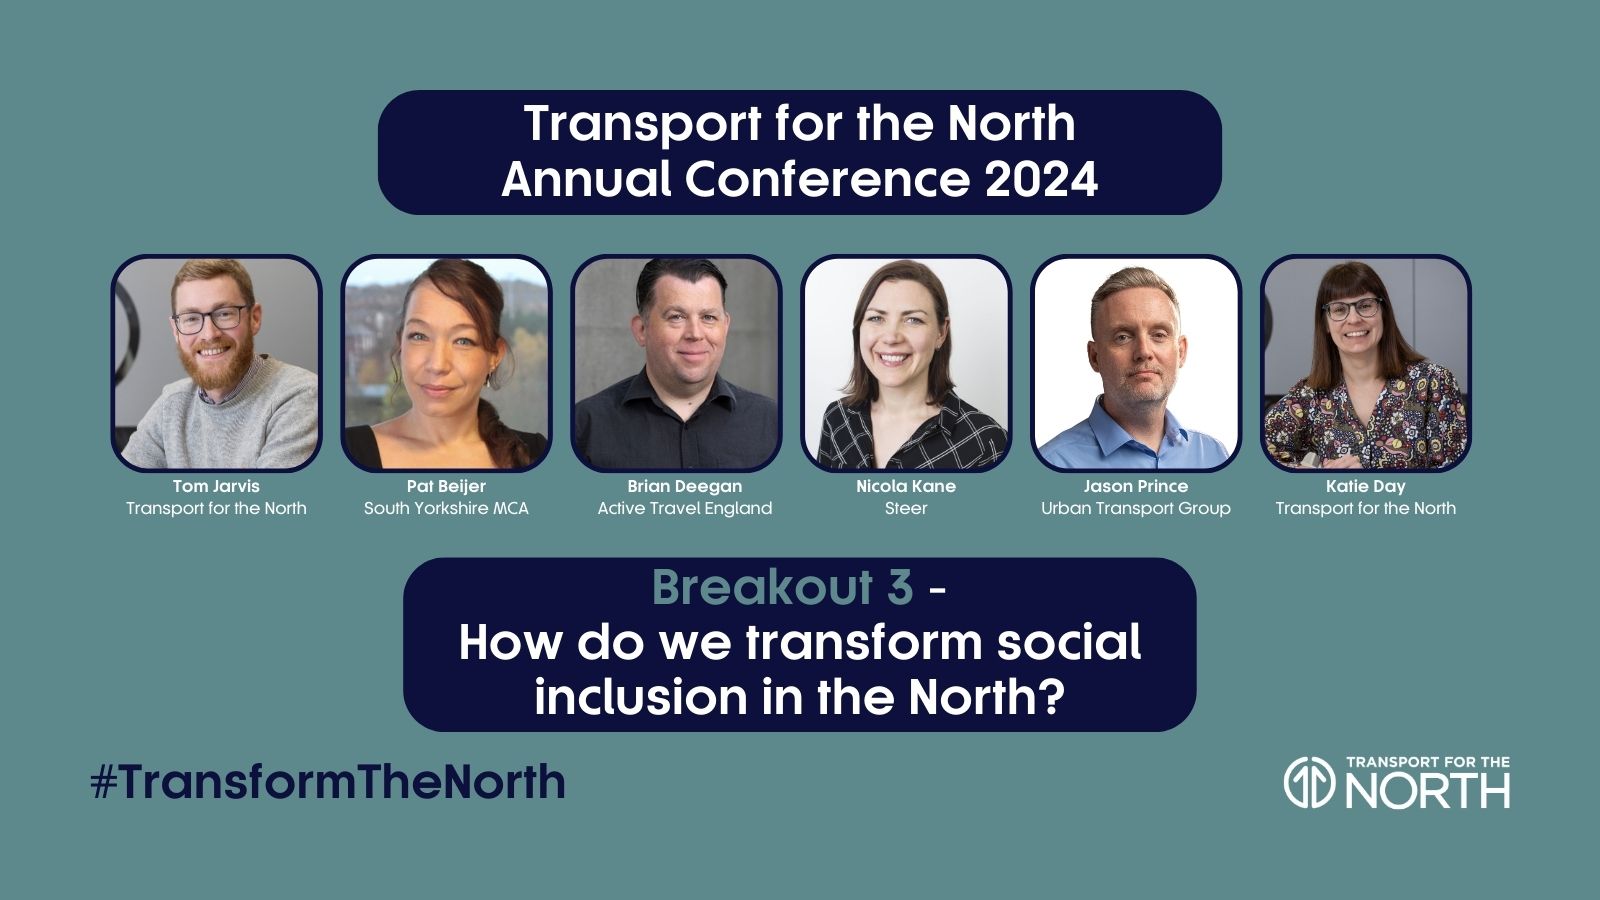 How do we transform social inclusion in the North?